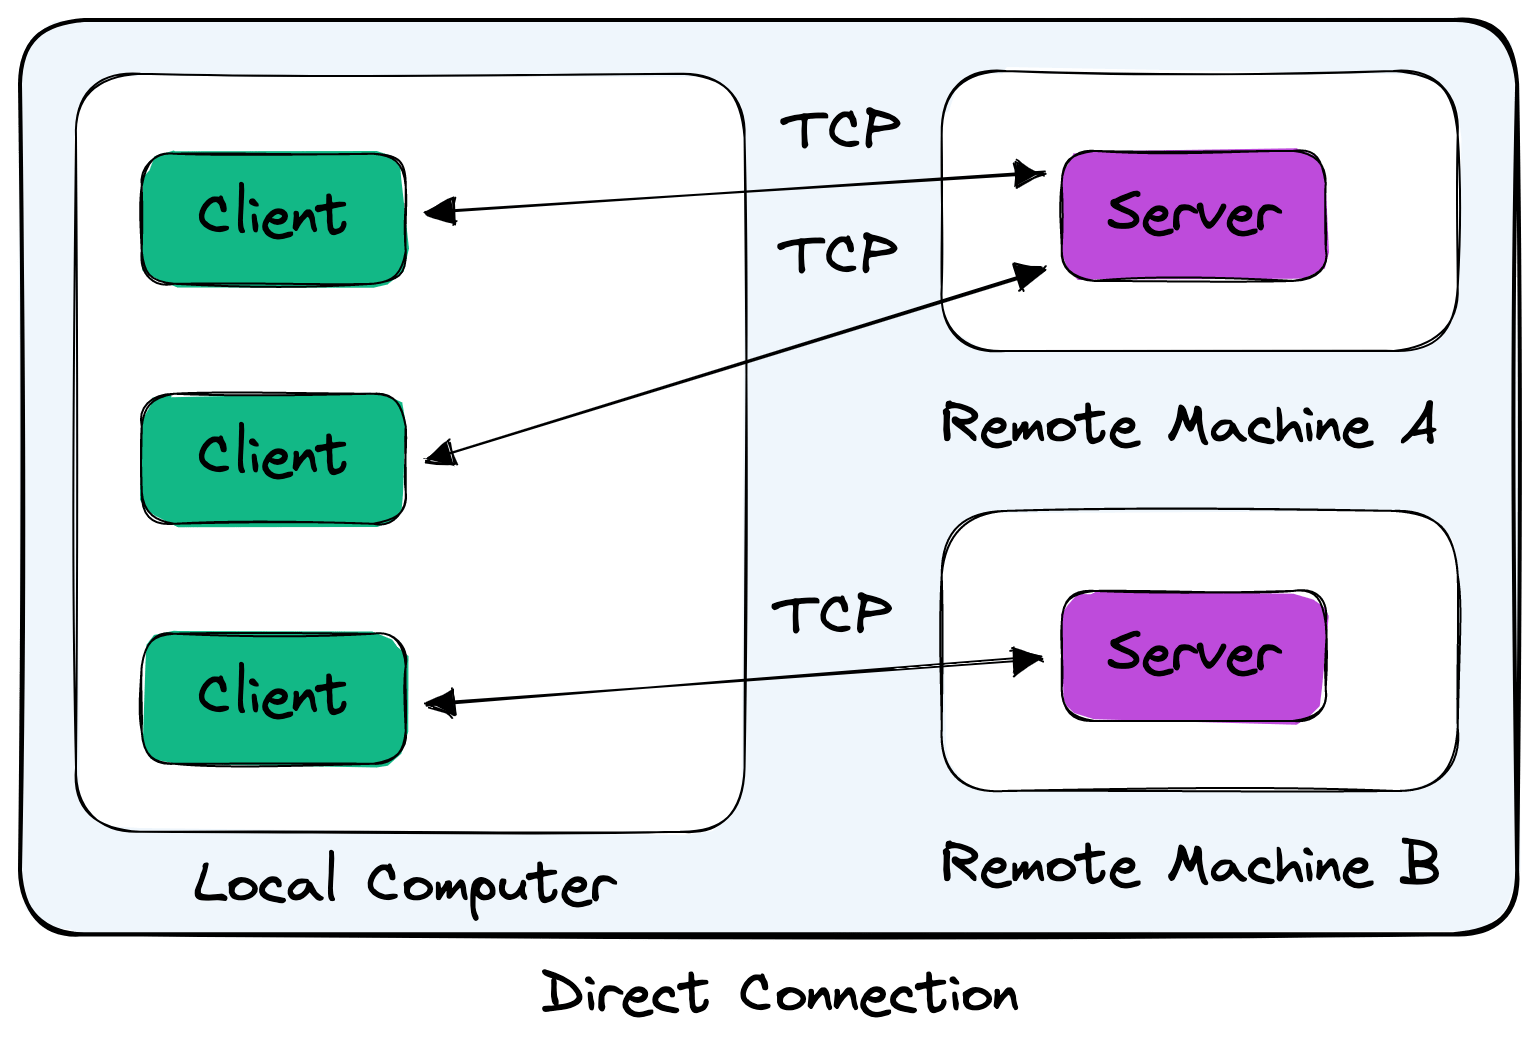 Multiple Direct Connection